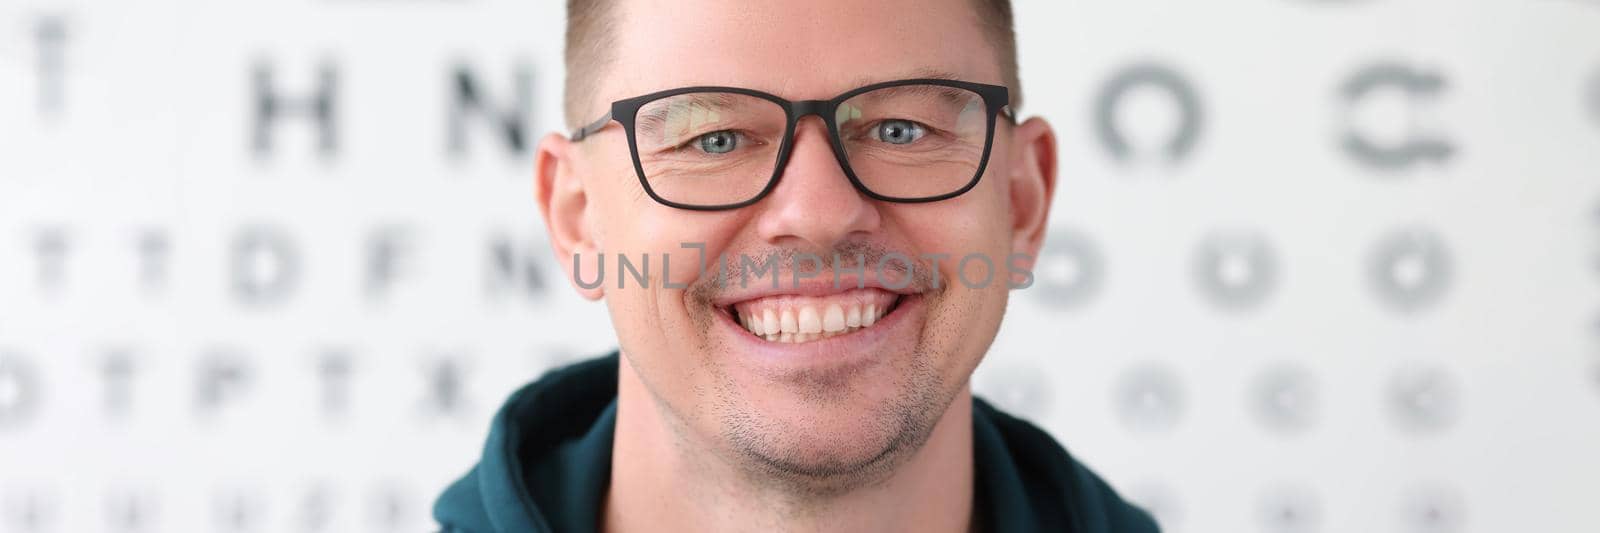 Portrait of smiling man with glasses on background of table for vision test by kuprevich